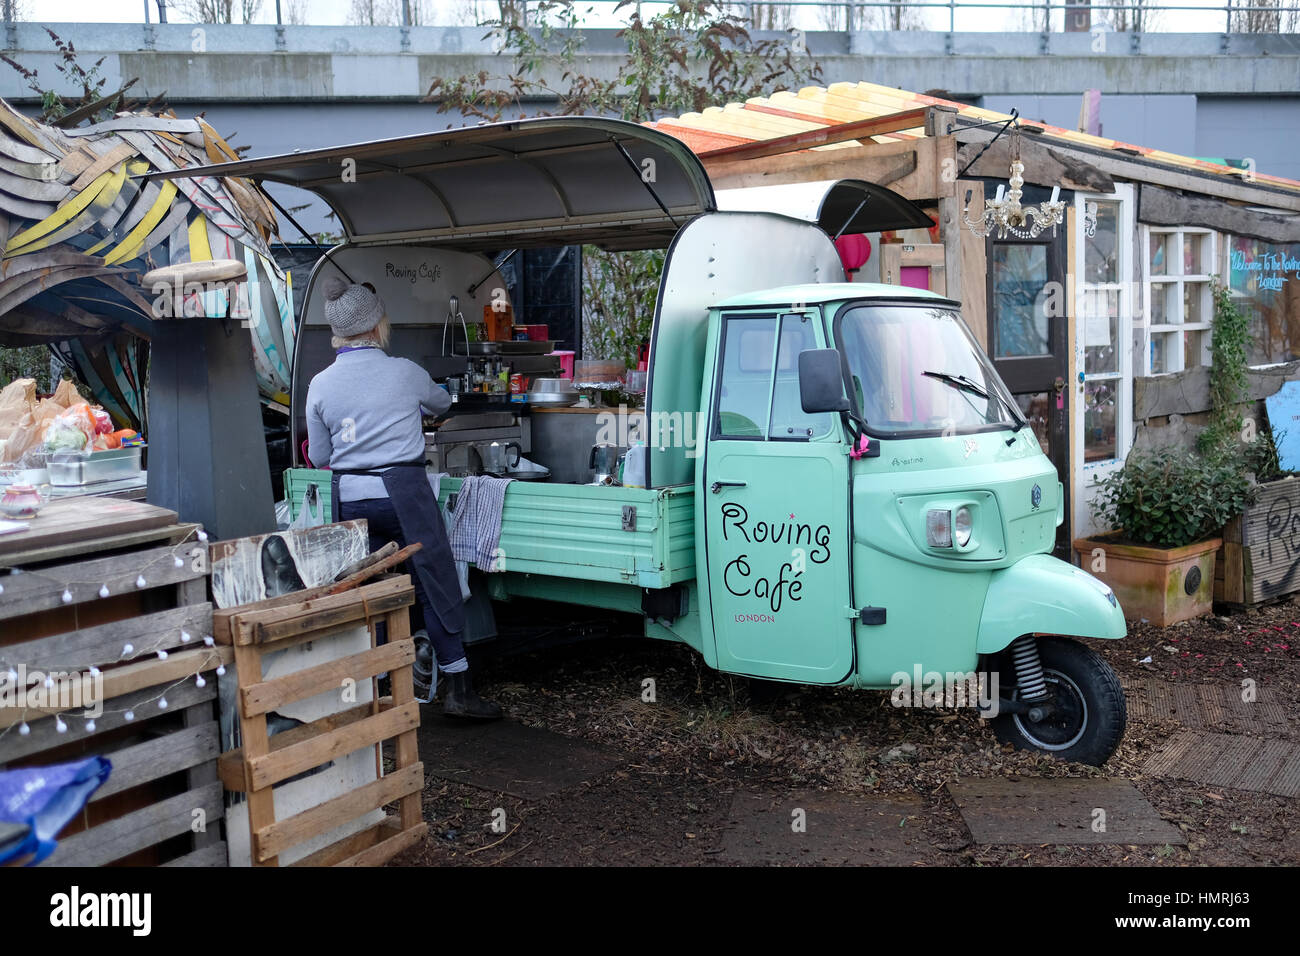 A woman serving food at 'The Roving Cafe' vintage three-wheeler car in The Nomadic Community Garden off Brick Lane in Shoreditch, East London, UK. Stock Photo